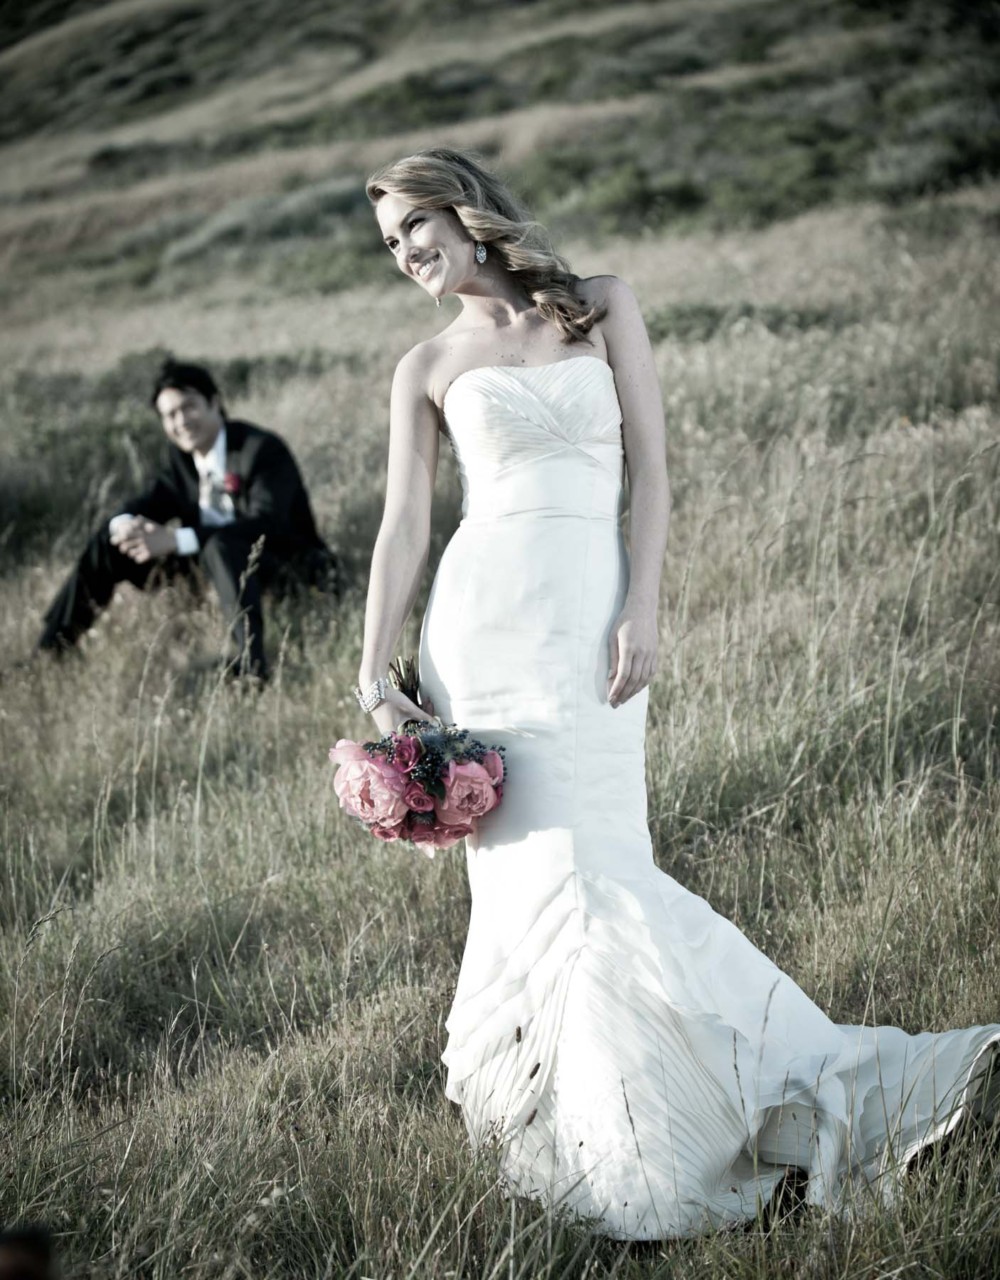 Looking for a professional wedding photographer in Talkeetna?